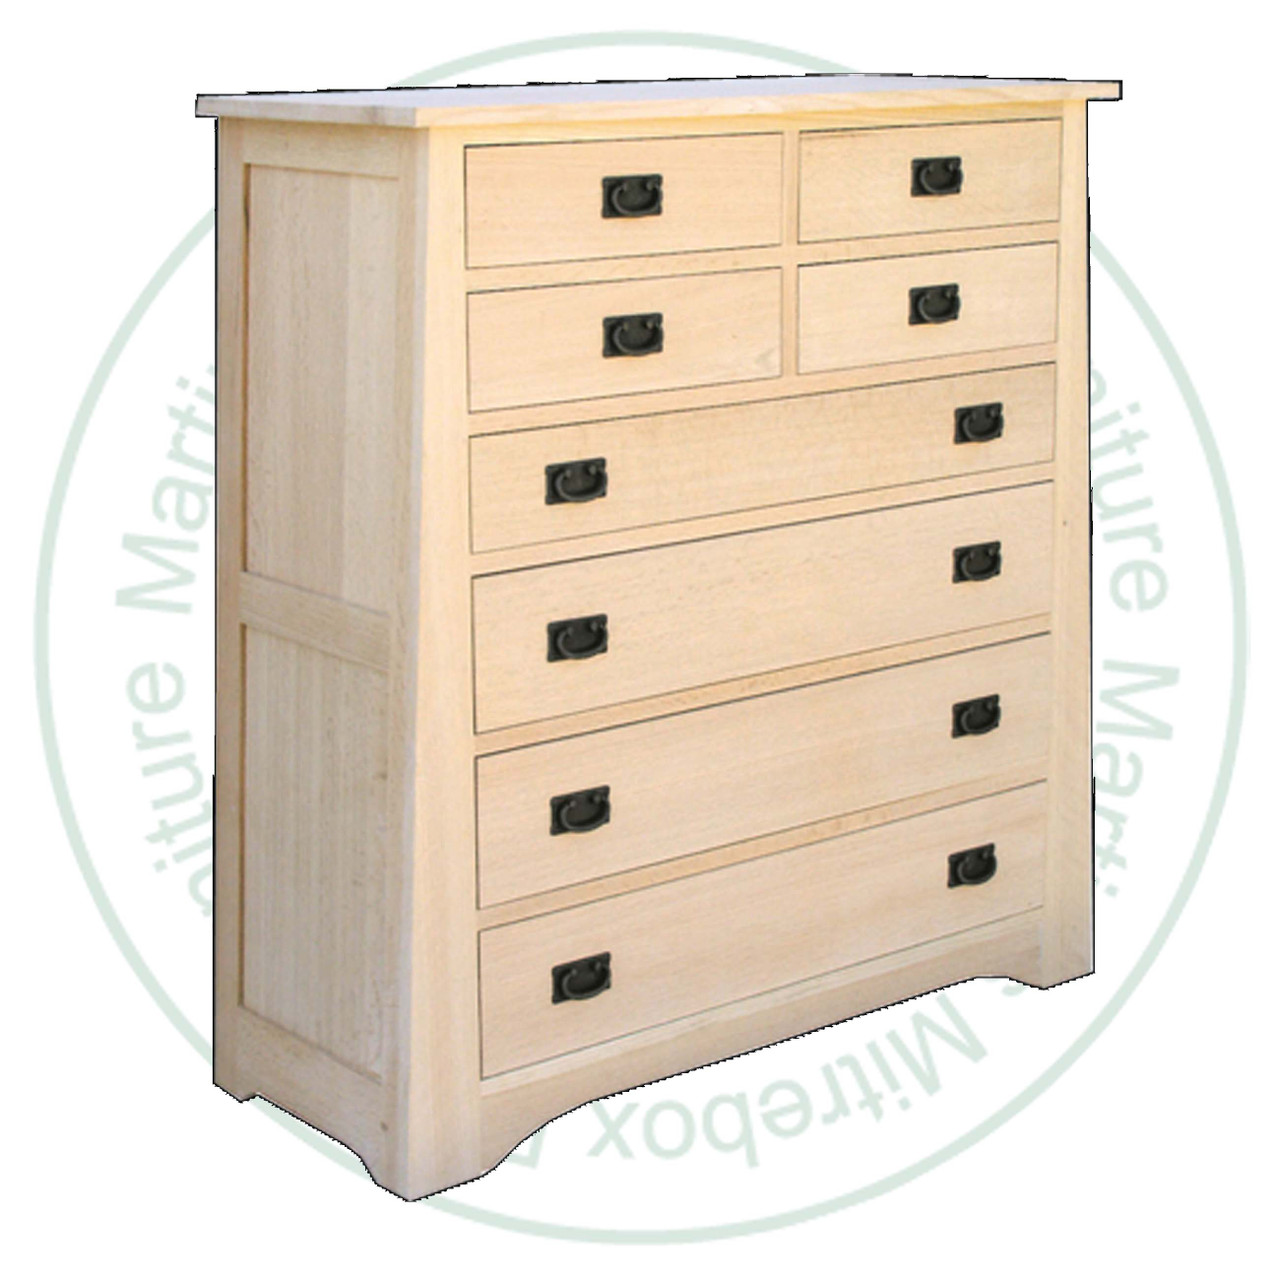 Maple Mission Horizon Chest Of Drawers 47.5''W x 51''H x 19''D